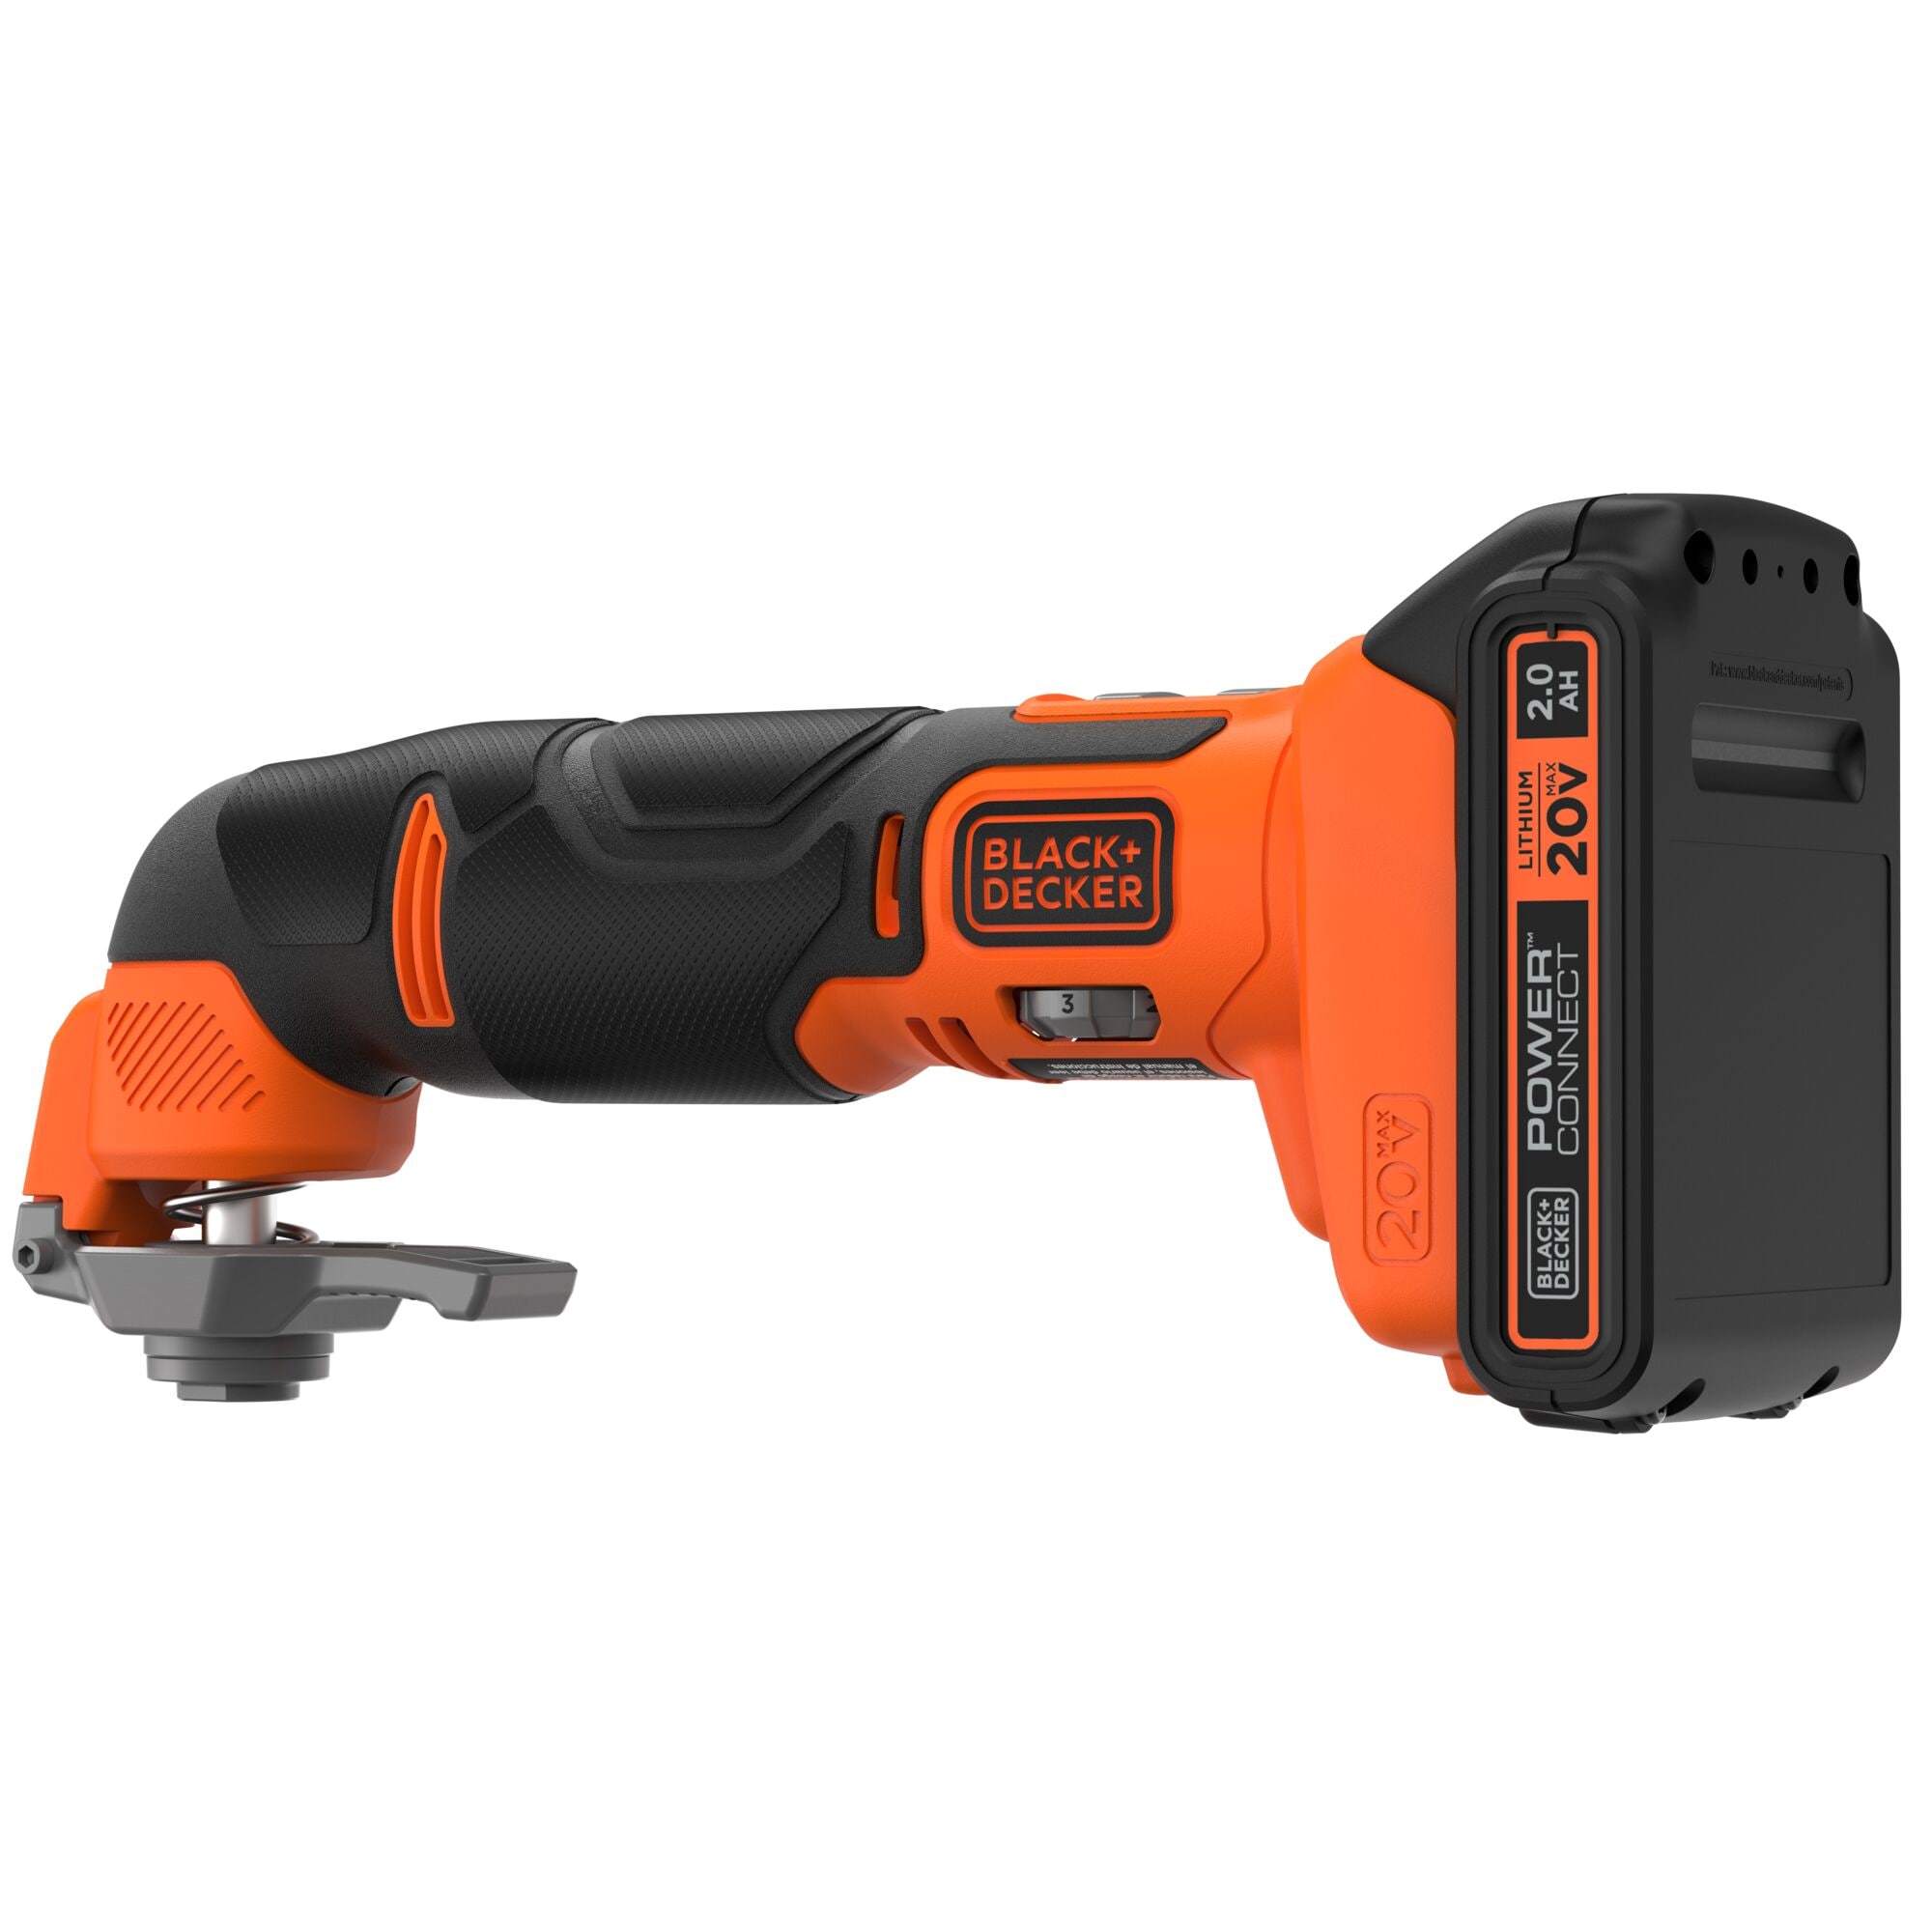 Black+Decker 300W Oscillating Tool with Accessories BMT300-XE